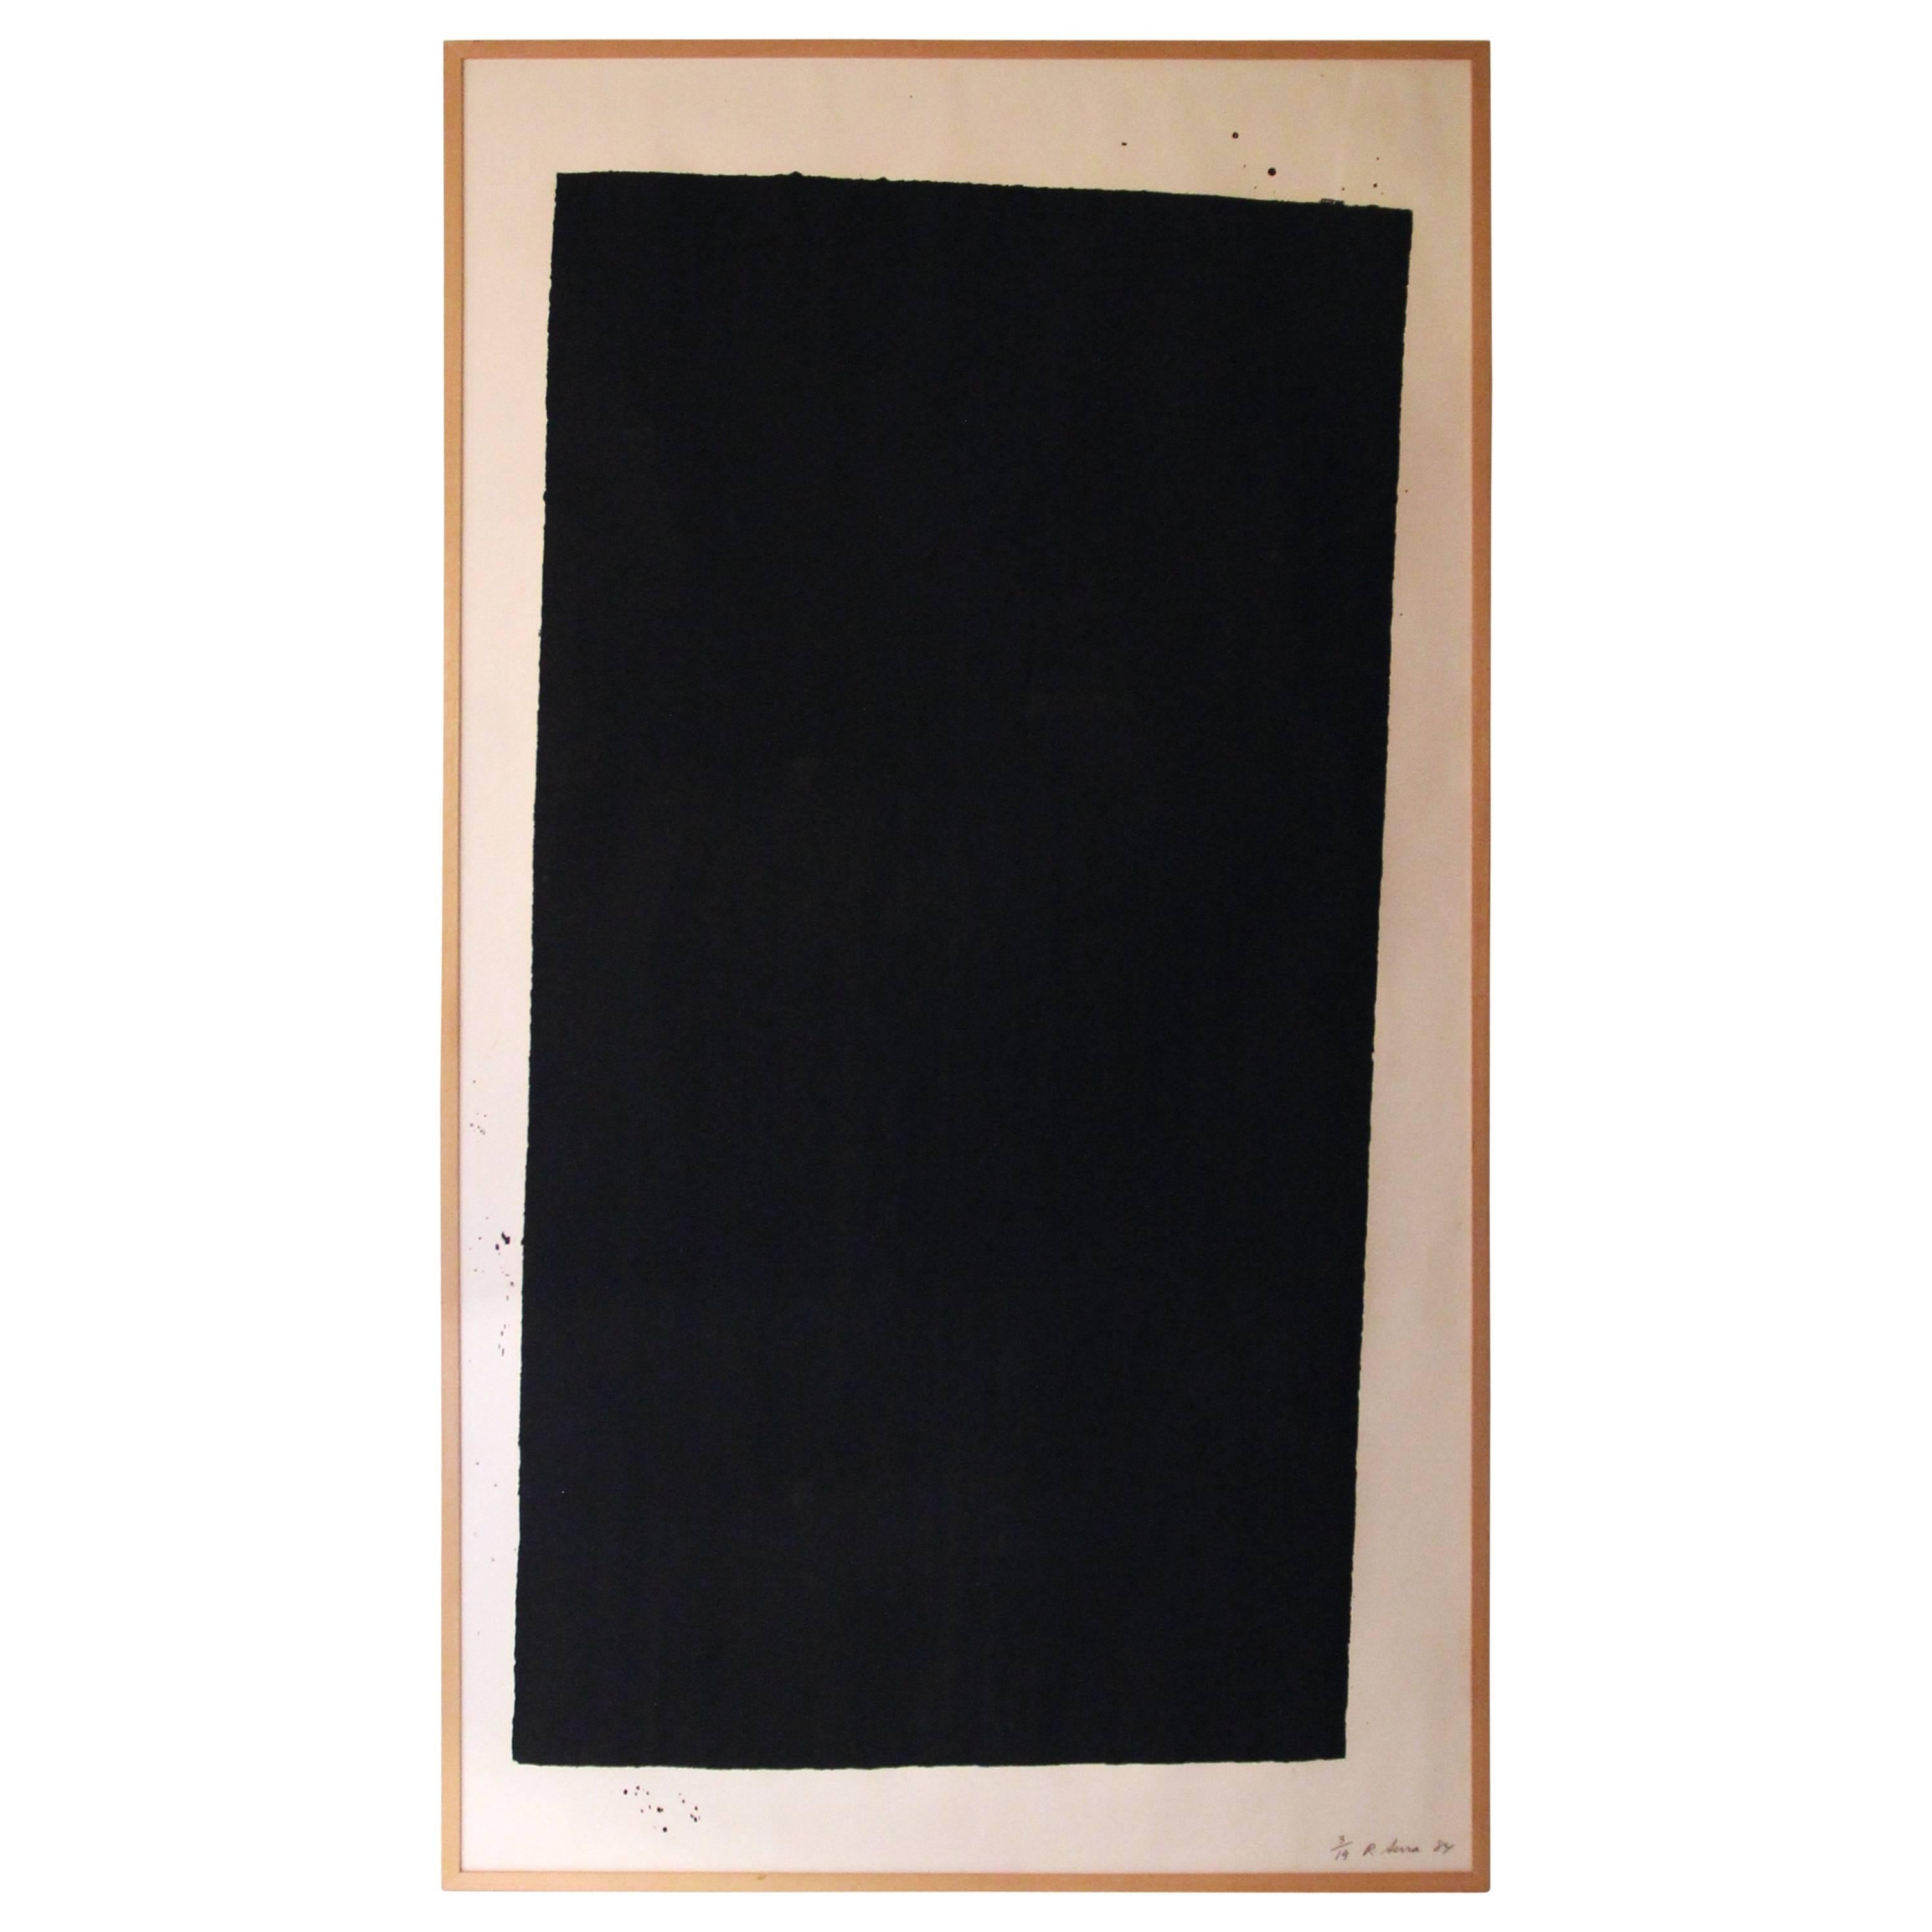 Richard Serra, "Glenda Lough" Painting, Signed, Numbered 3/19 and Dated 1984